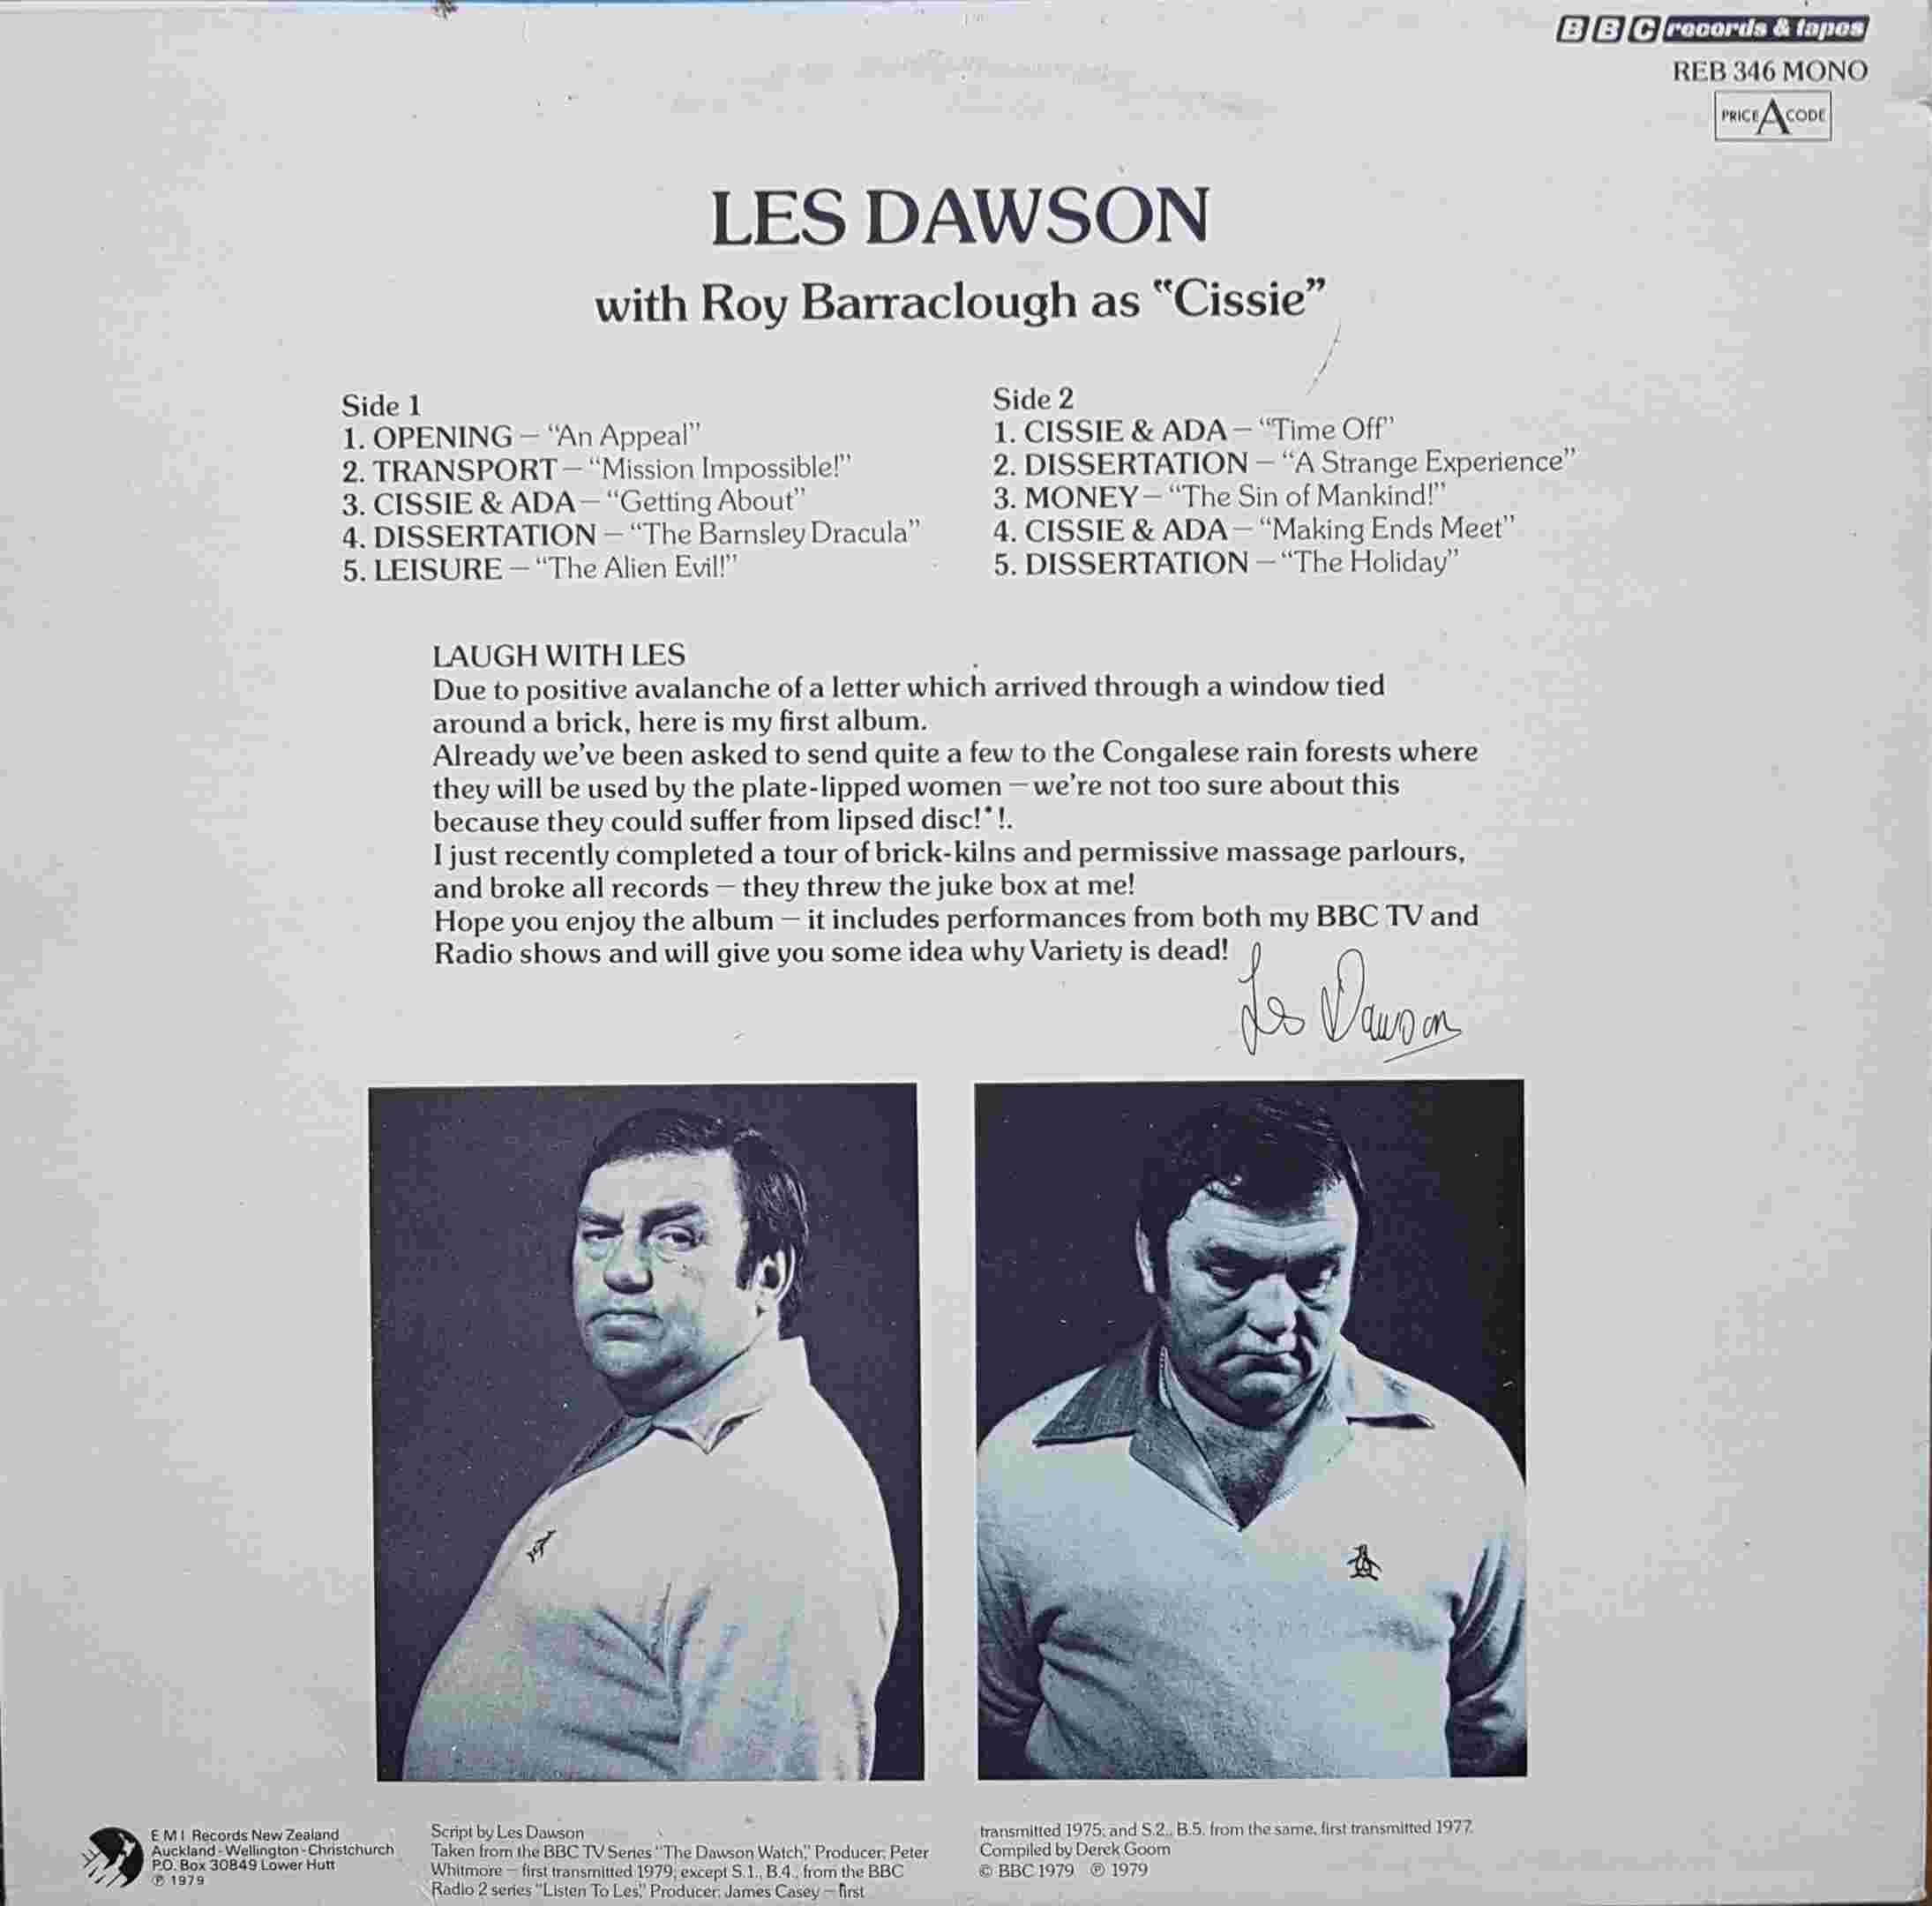 Picture of REB 346 Laugh with Les Dawson by artist Les Dawson from the BBC records and Tapes library